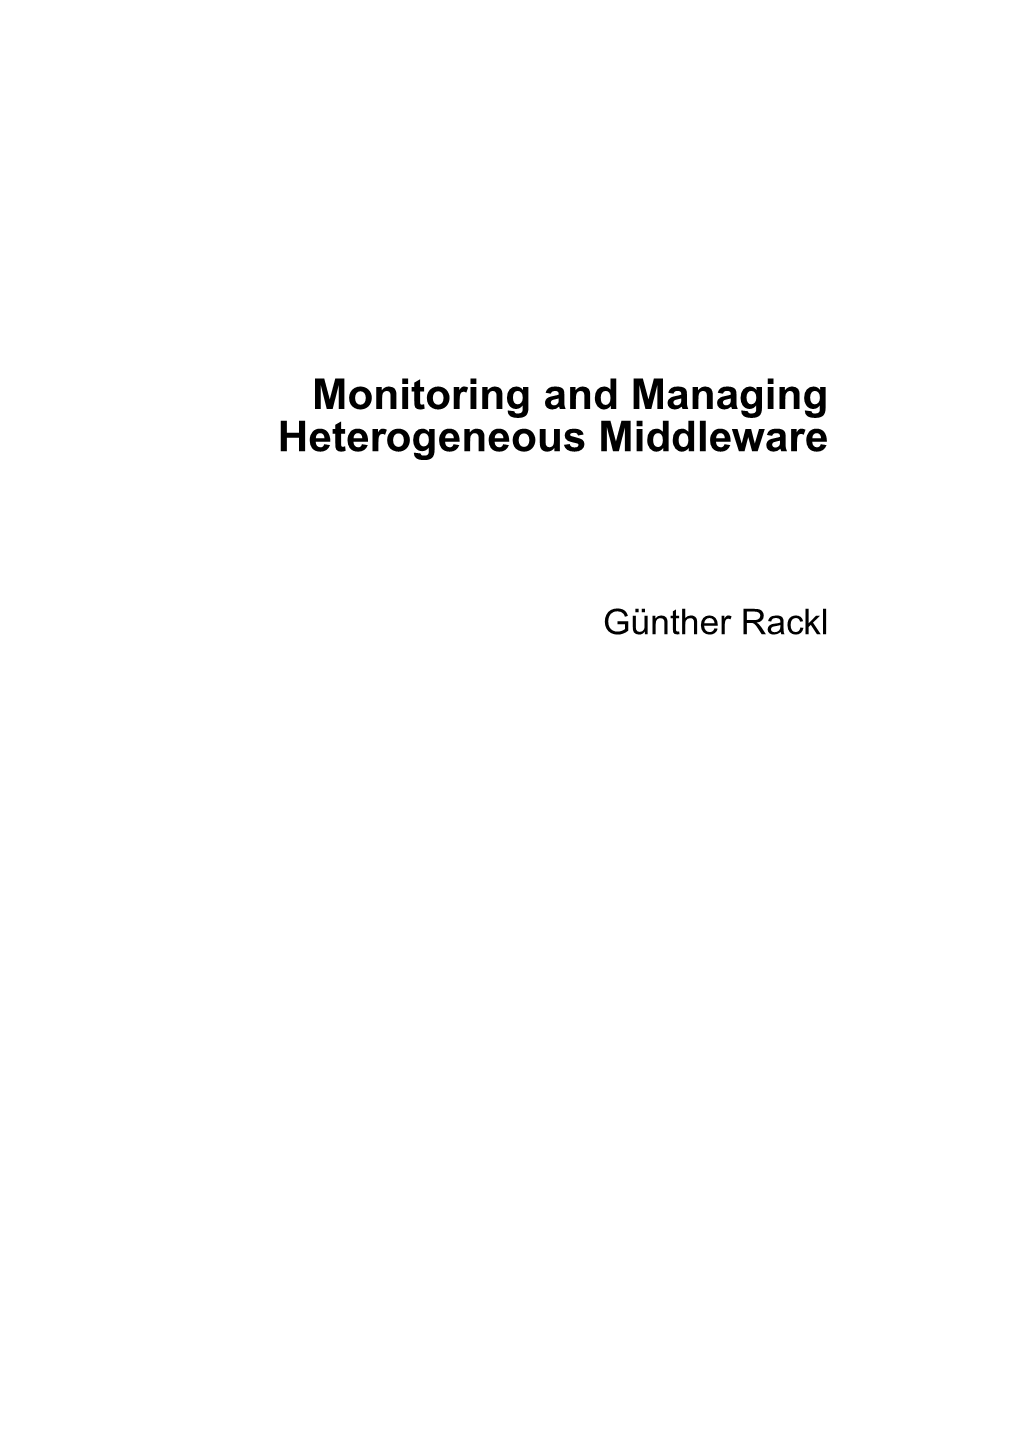 Monitoring and Managing Heterogeneous Middleware